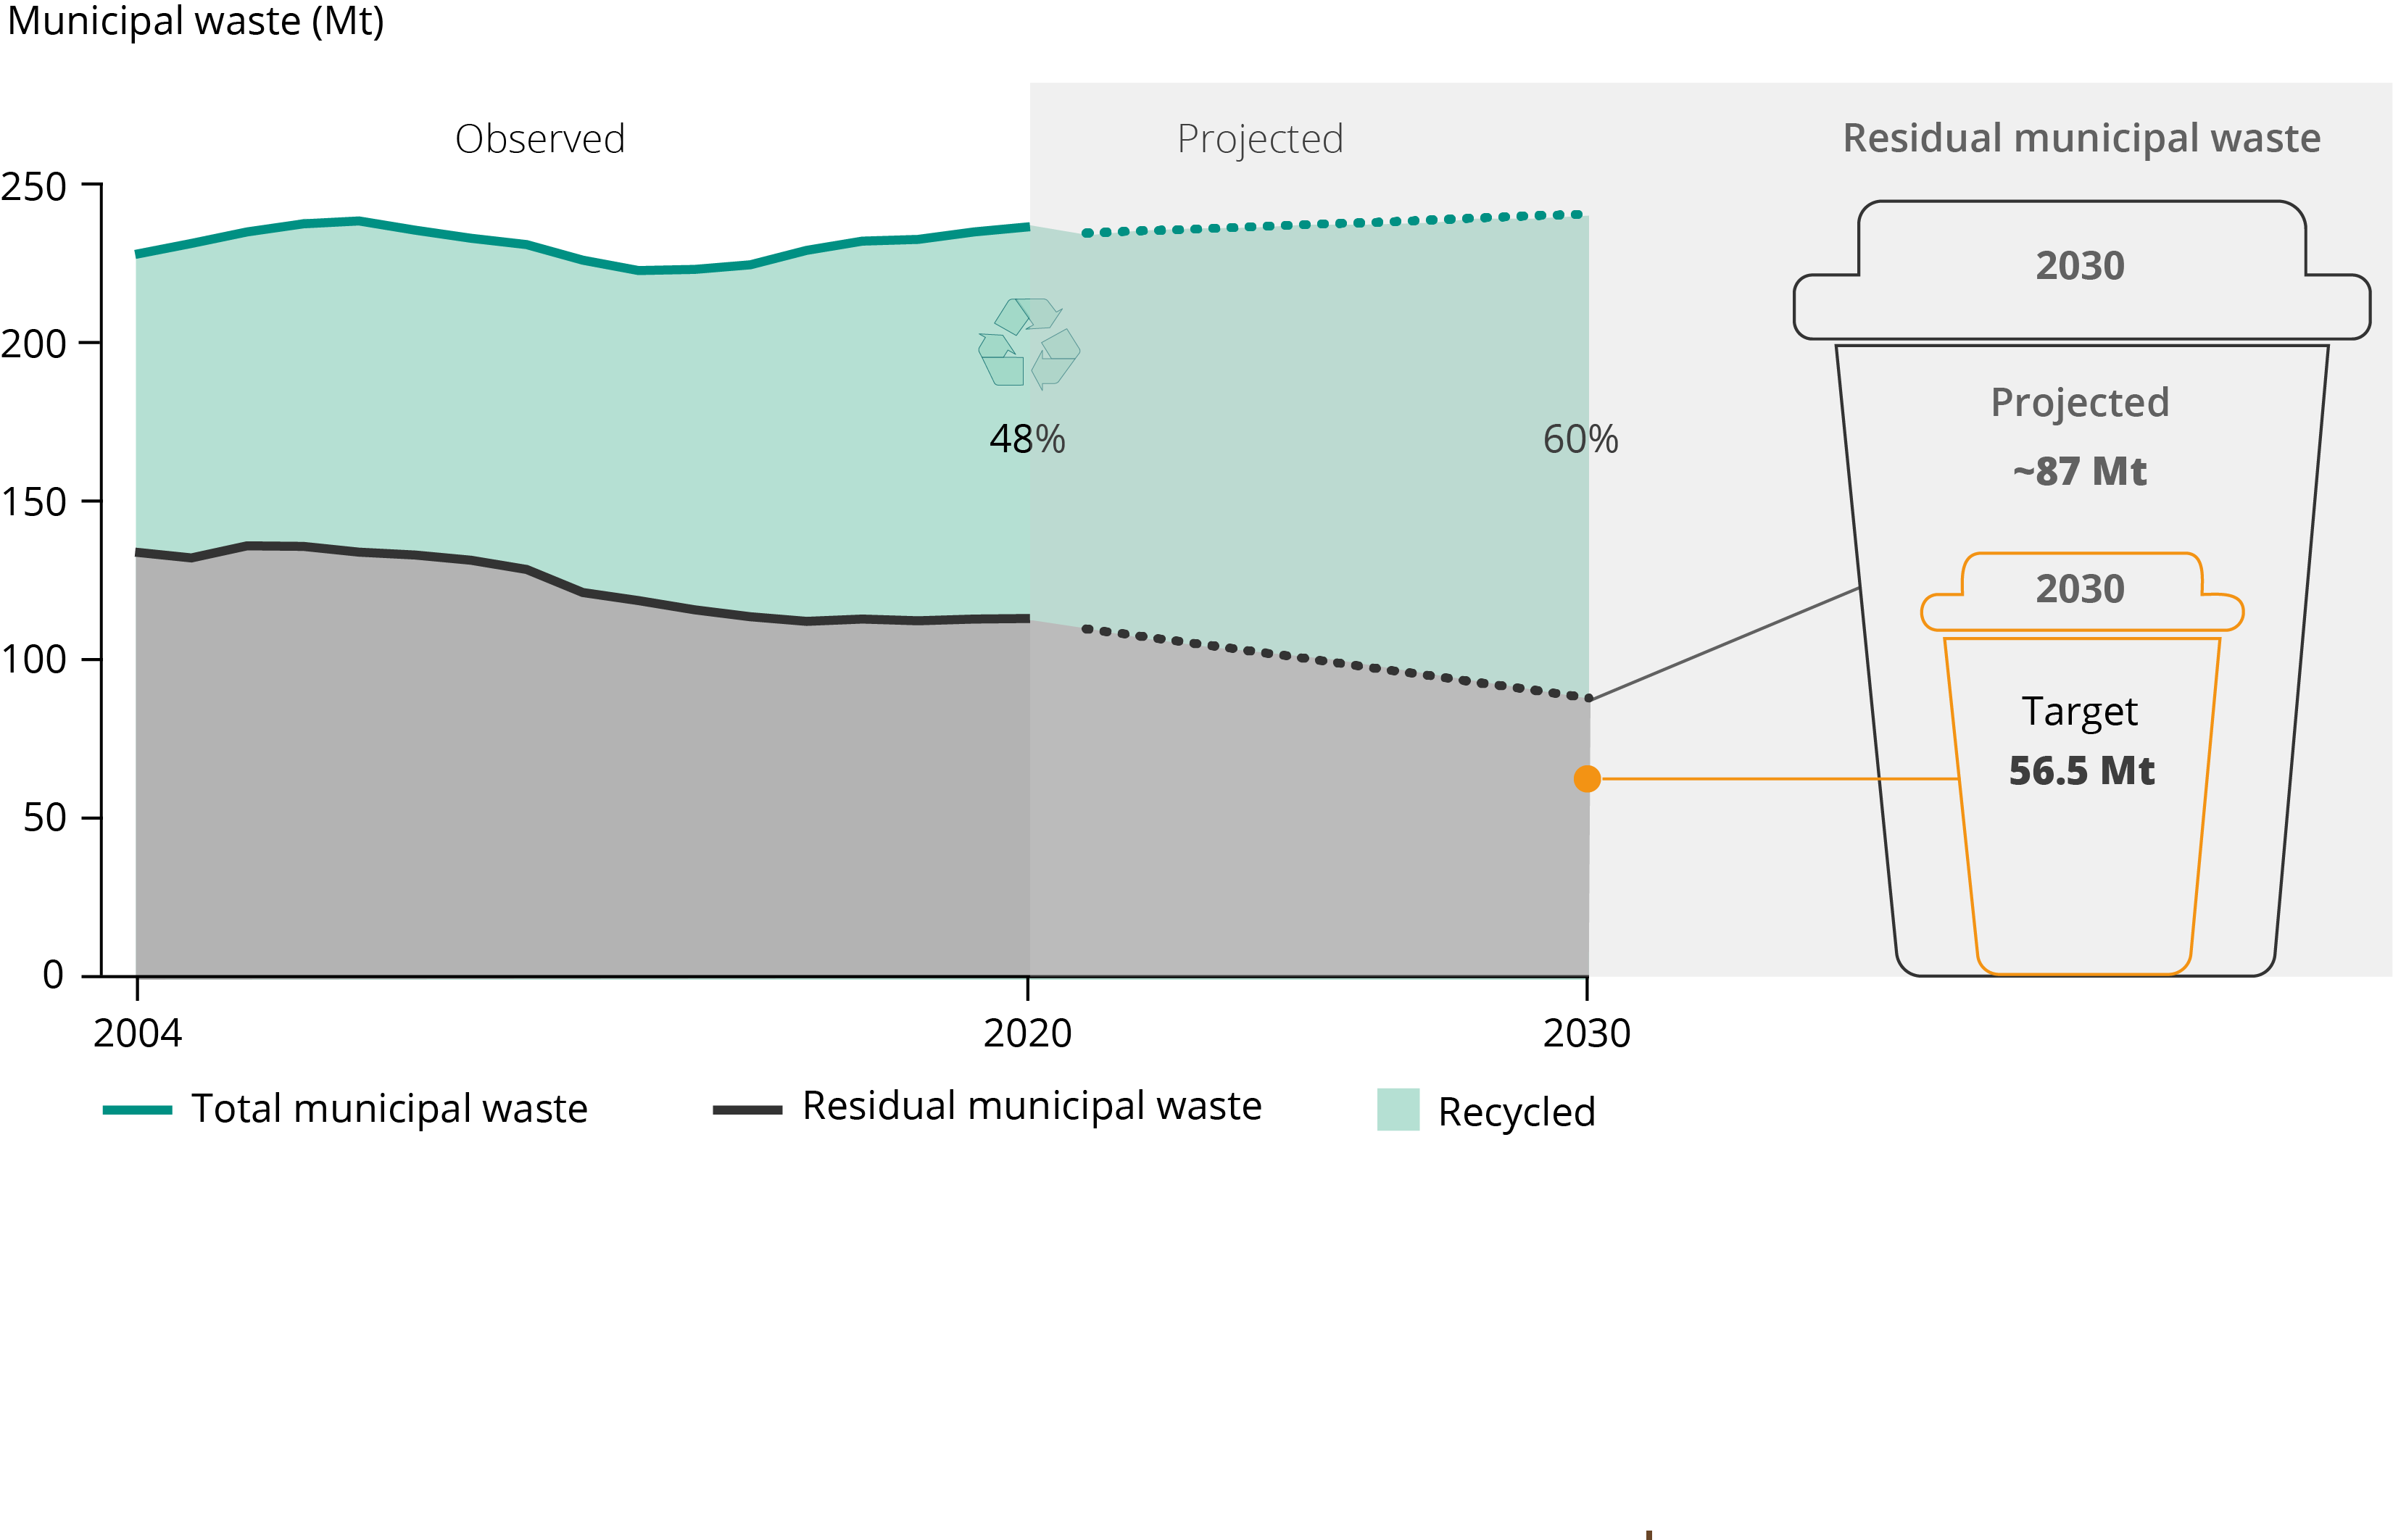 Figure 5. Observed amounts of total and residual municipal waste, together with total municipal waste generated under the projection of an increase in municipal waste of 3.7% by 2030 and the corresponding amount of residual waste if the 2030 recycling target is met